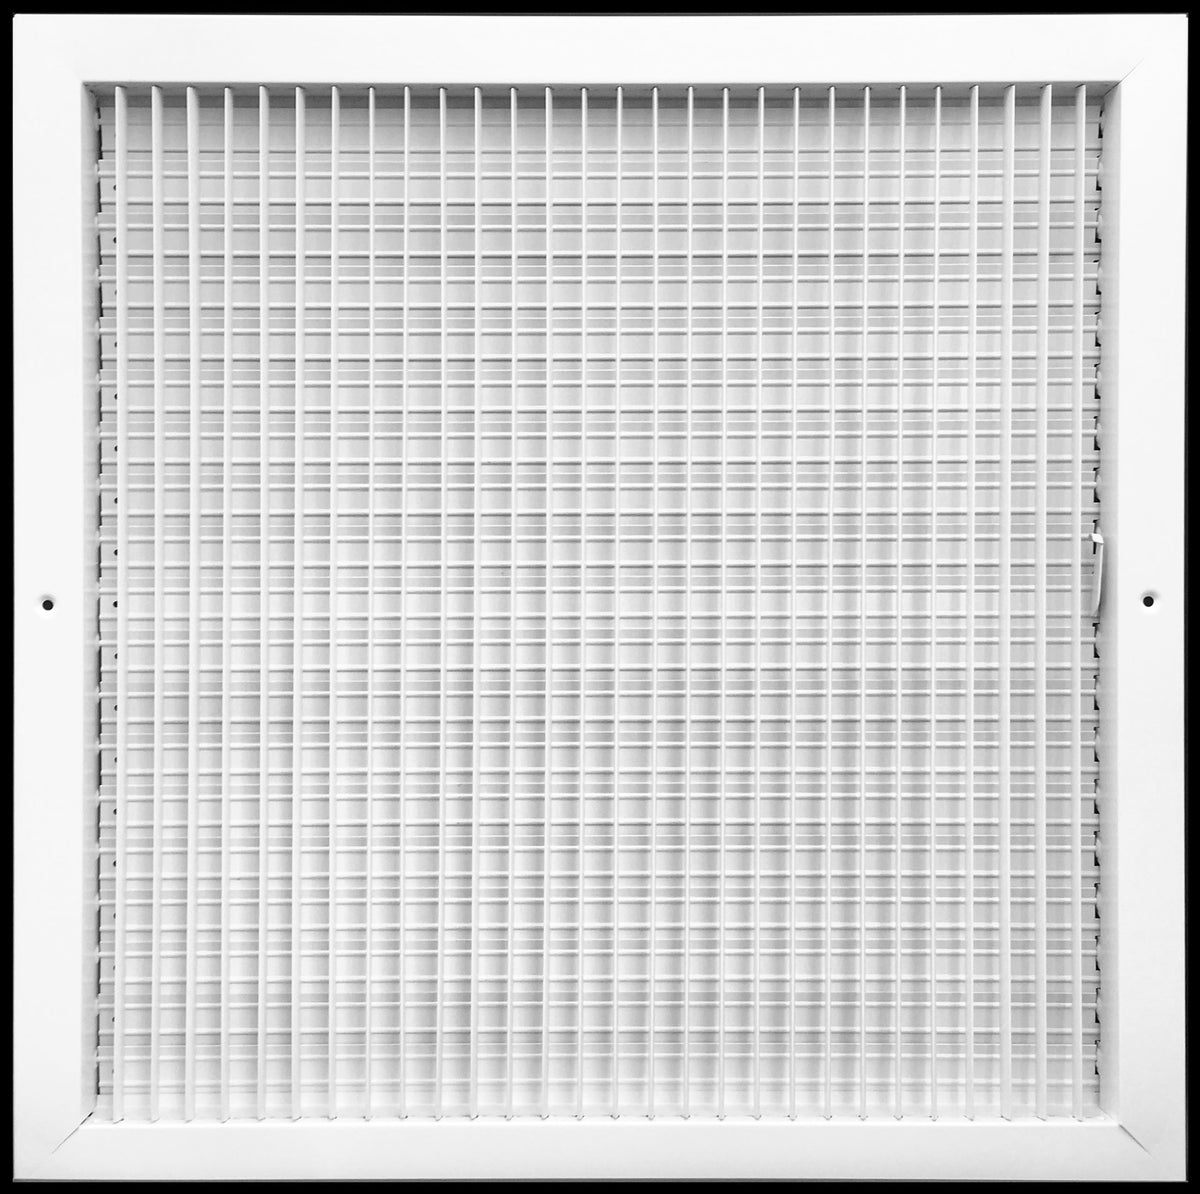 20&quot; X 20&quot; ADJUSTABLE AIR SUPPLY DIFFUSER - HVAC Vent Duct Cover Sidewall or Ceiling